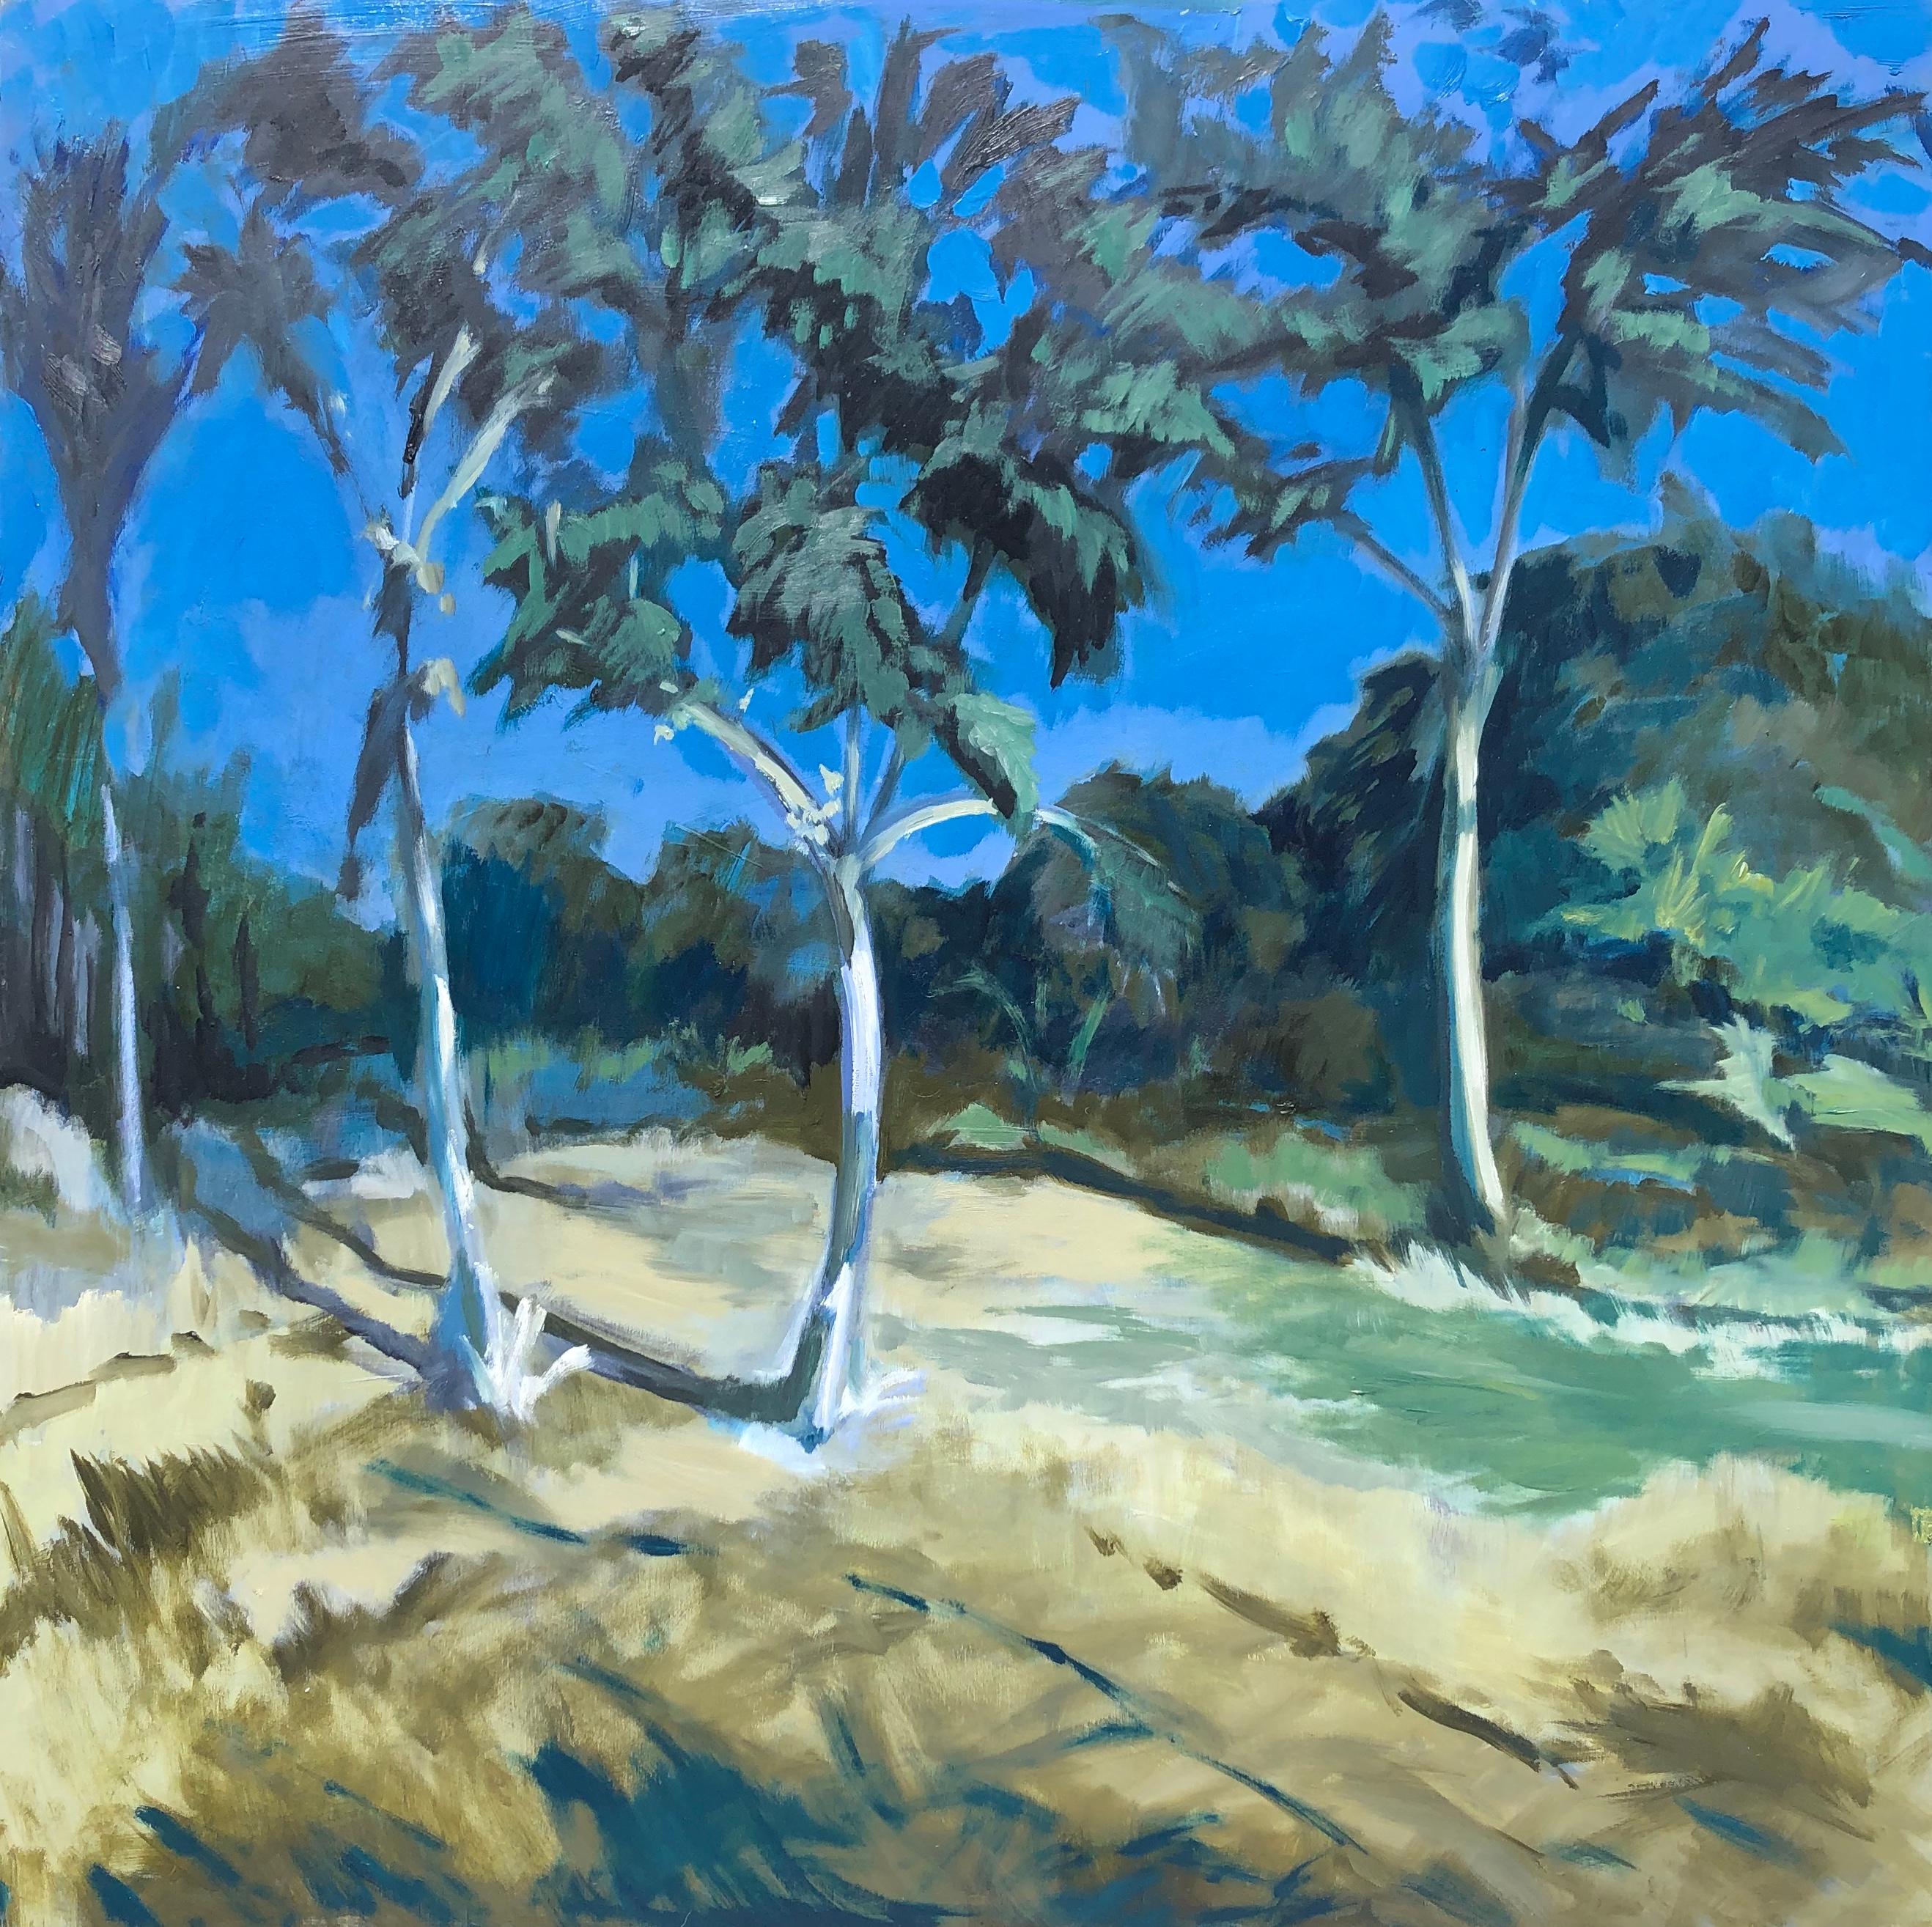 Patrick Bermingham Landscape Painting - "Full Moon in the Clearing" Night painting with trees in the blue moonlight